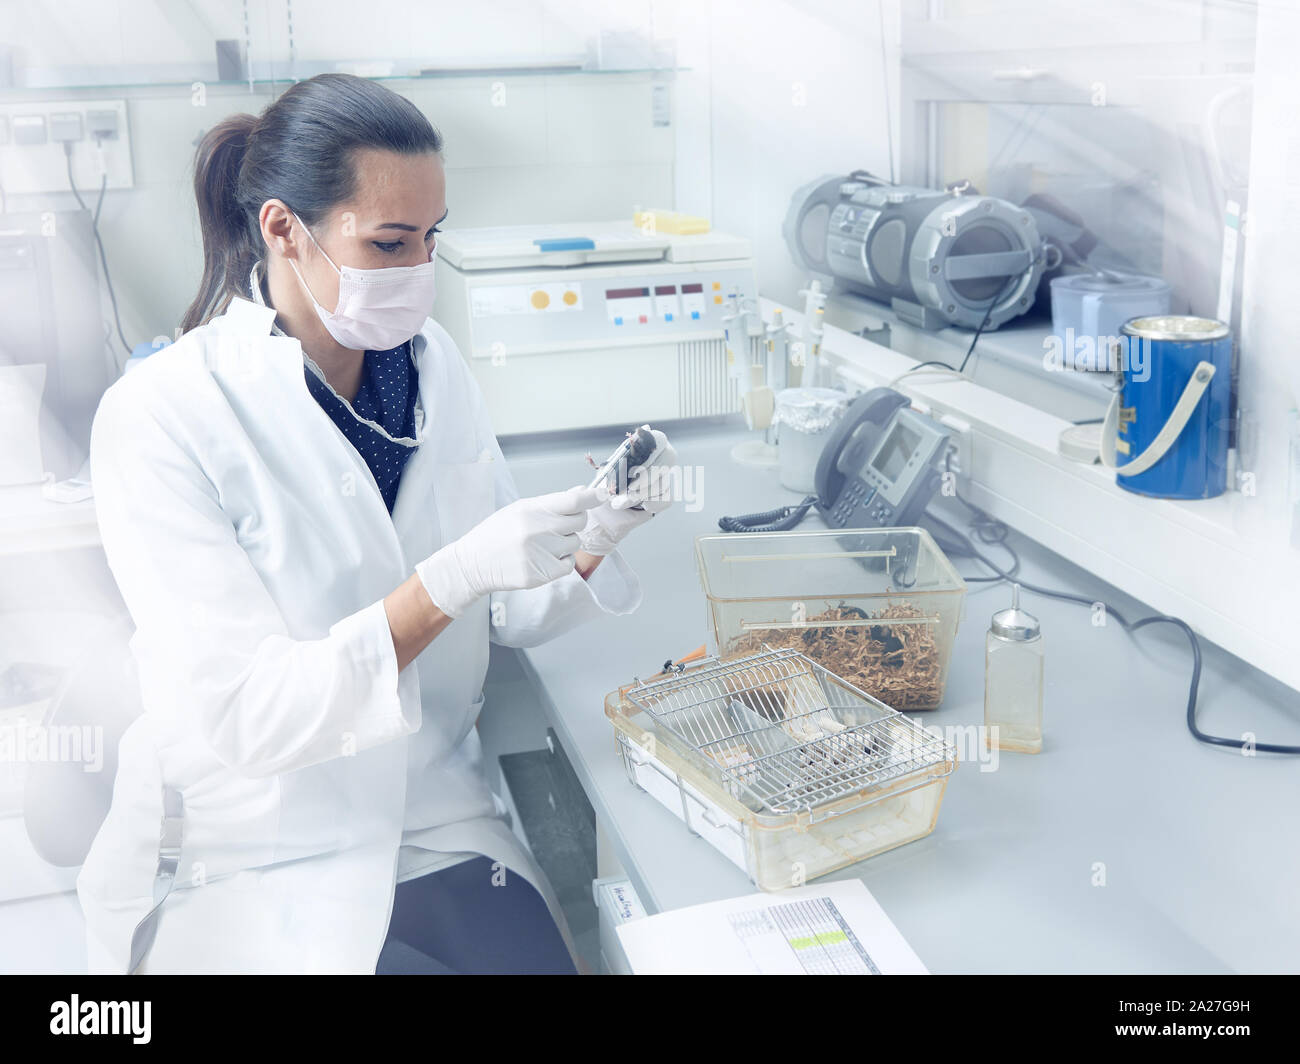 Female scientist performs animal testing in modern laboratory, academic research or industrial facility Stock Photo